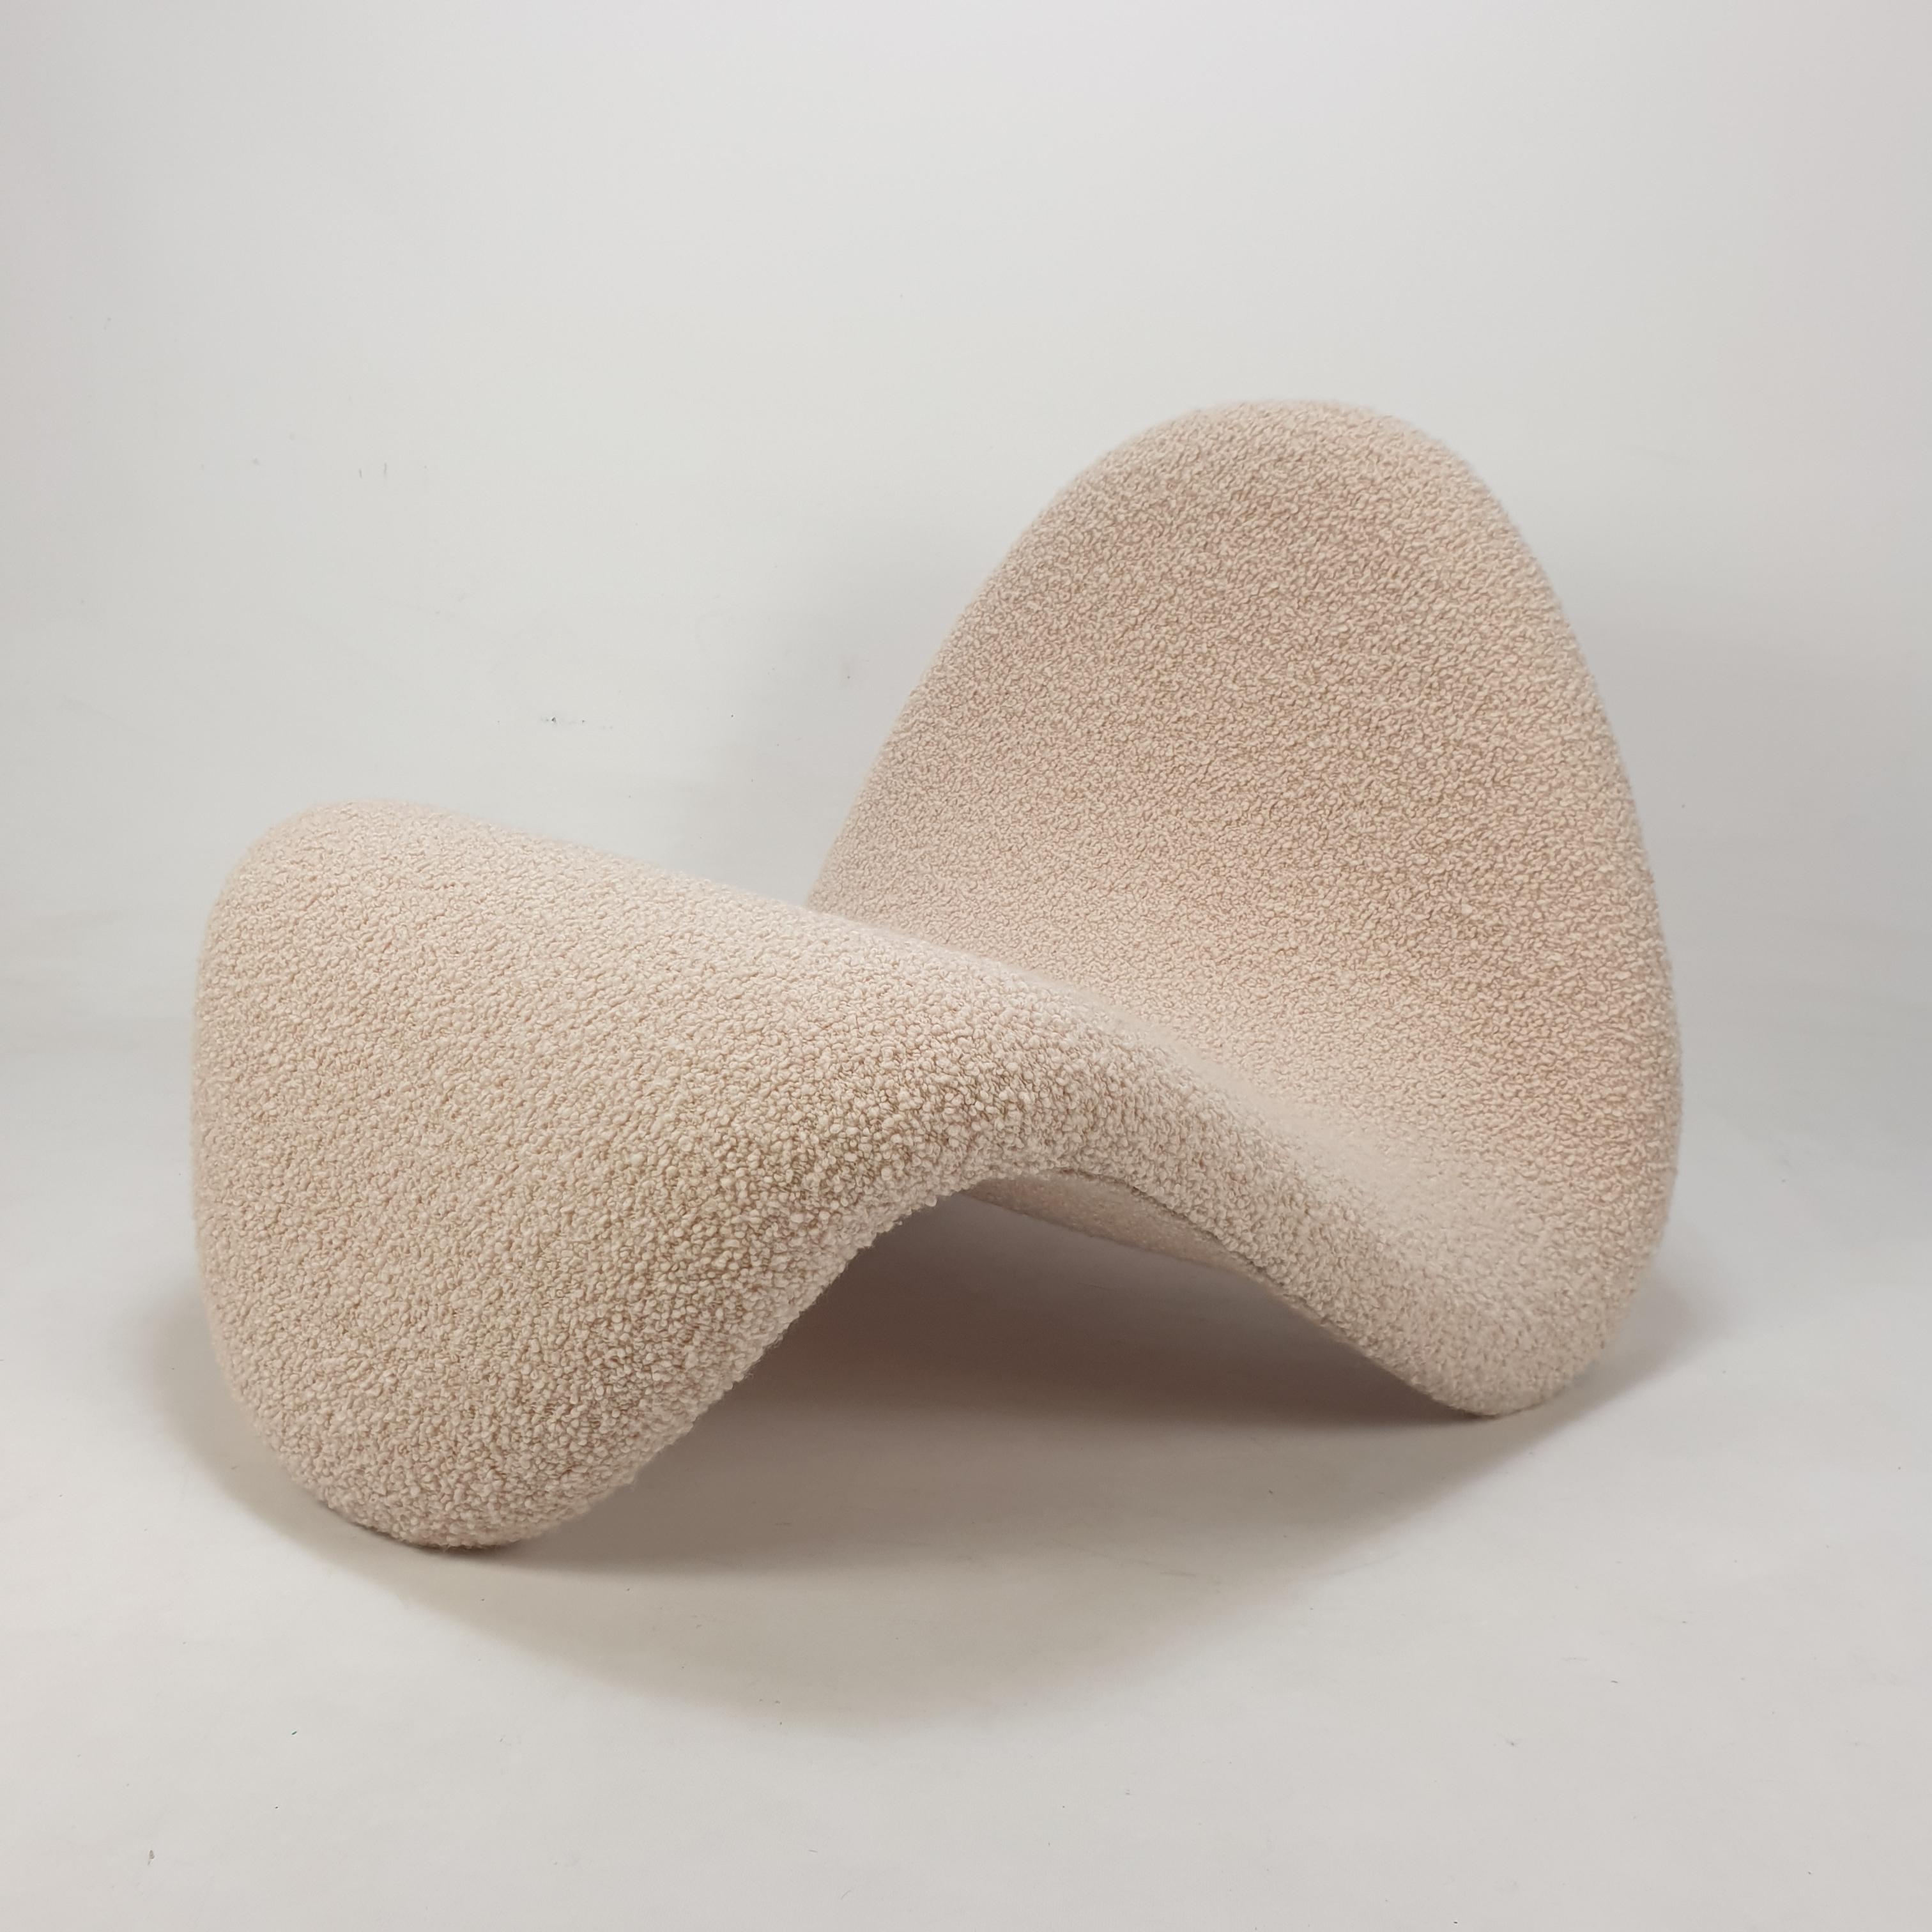 Mid-Century Modern Mid-Century Tongue Lounge Chair by Pierre Paulin for Artifort, 1960s For Sale